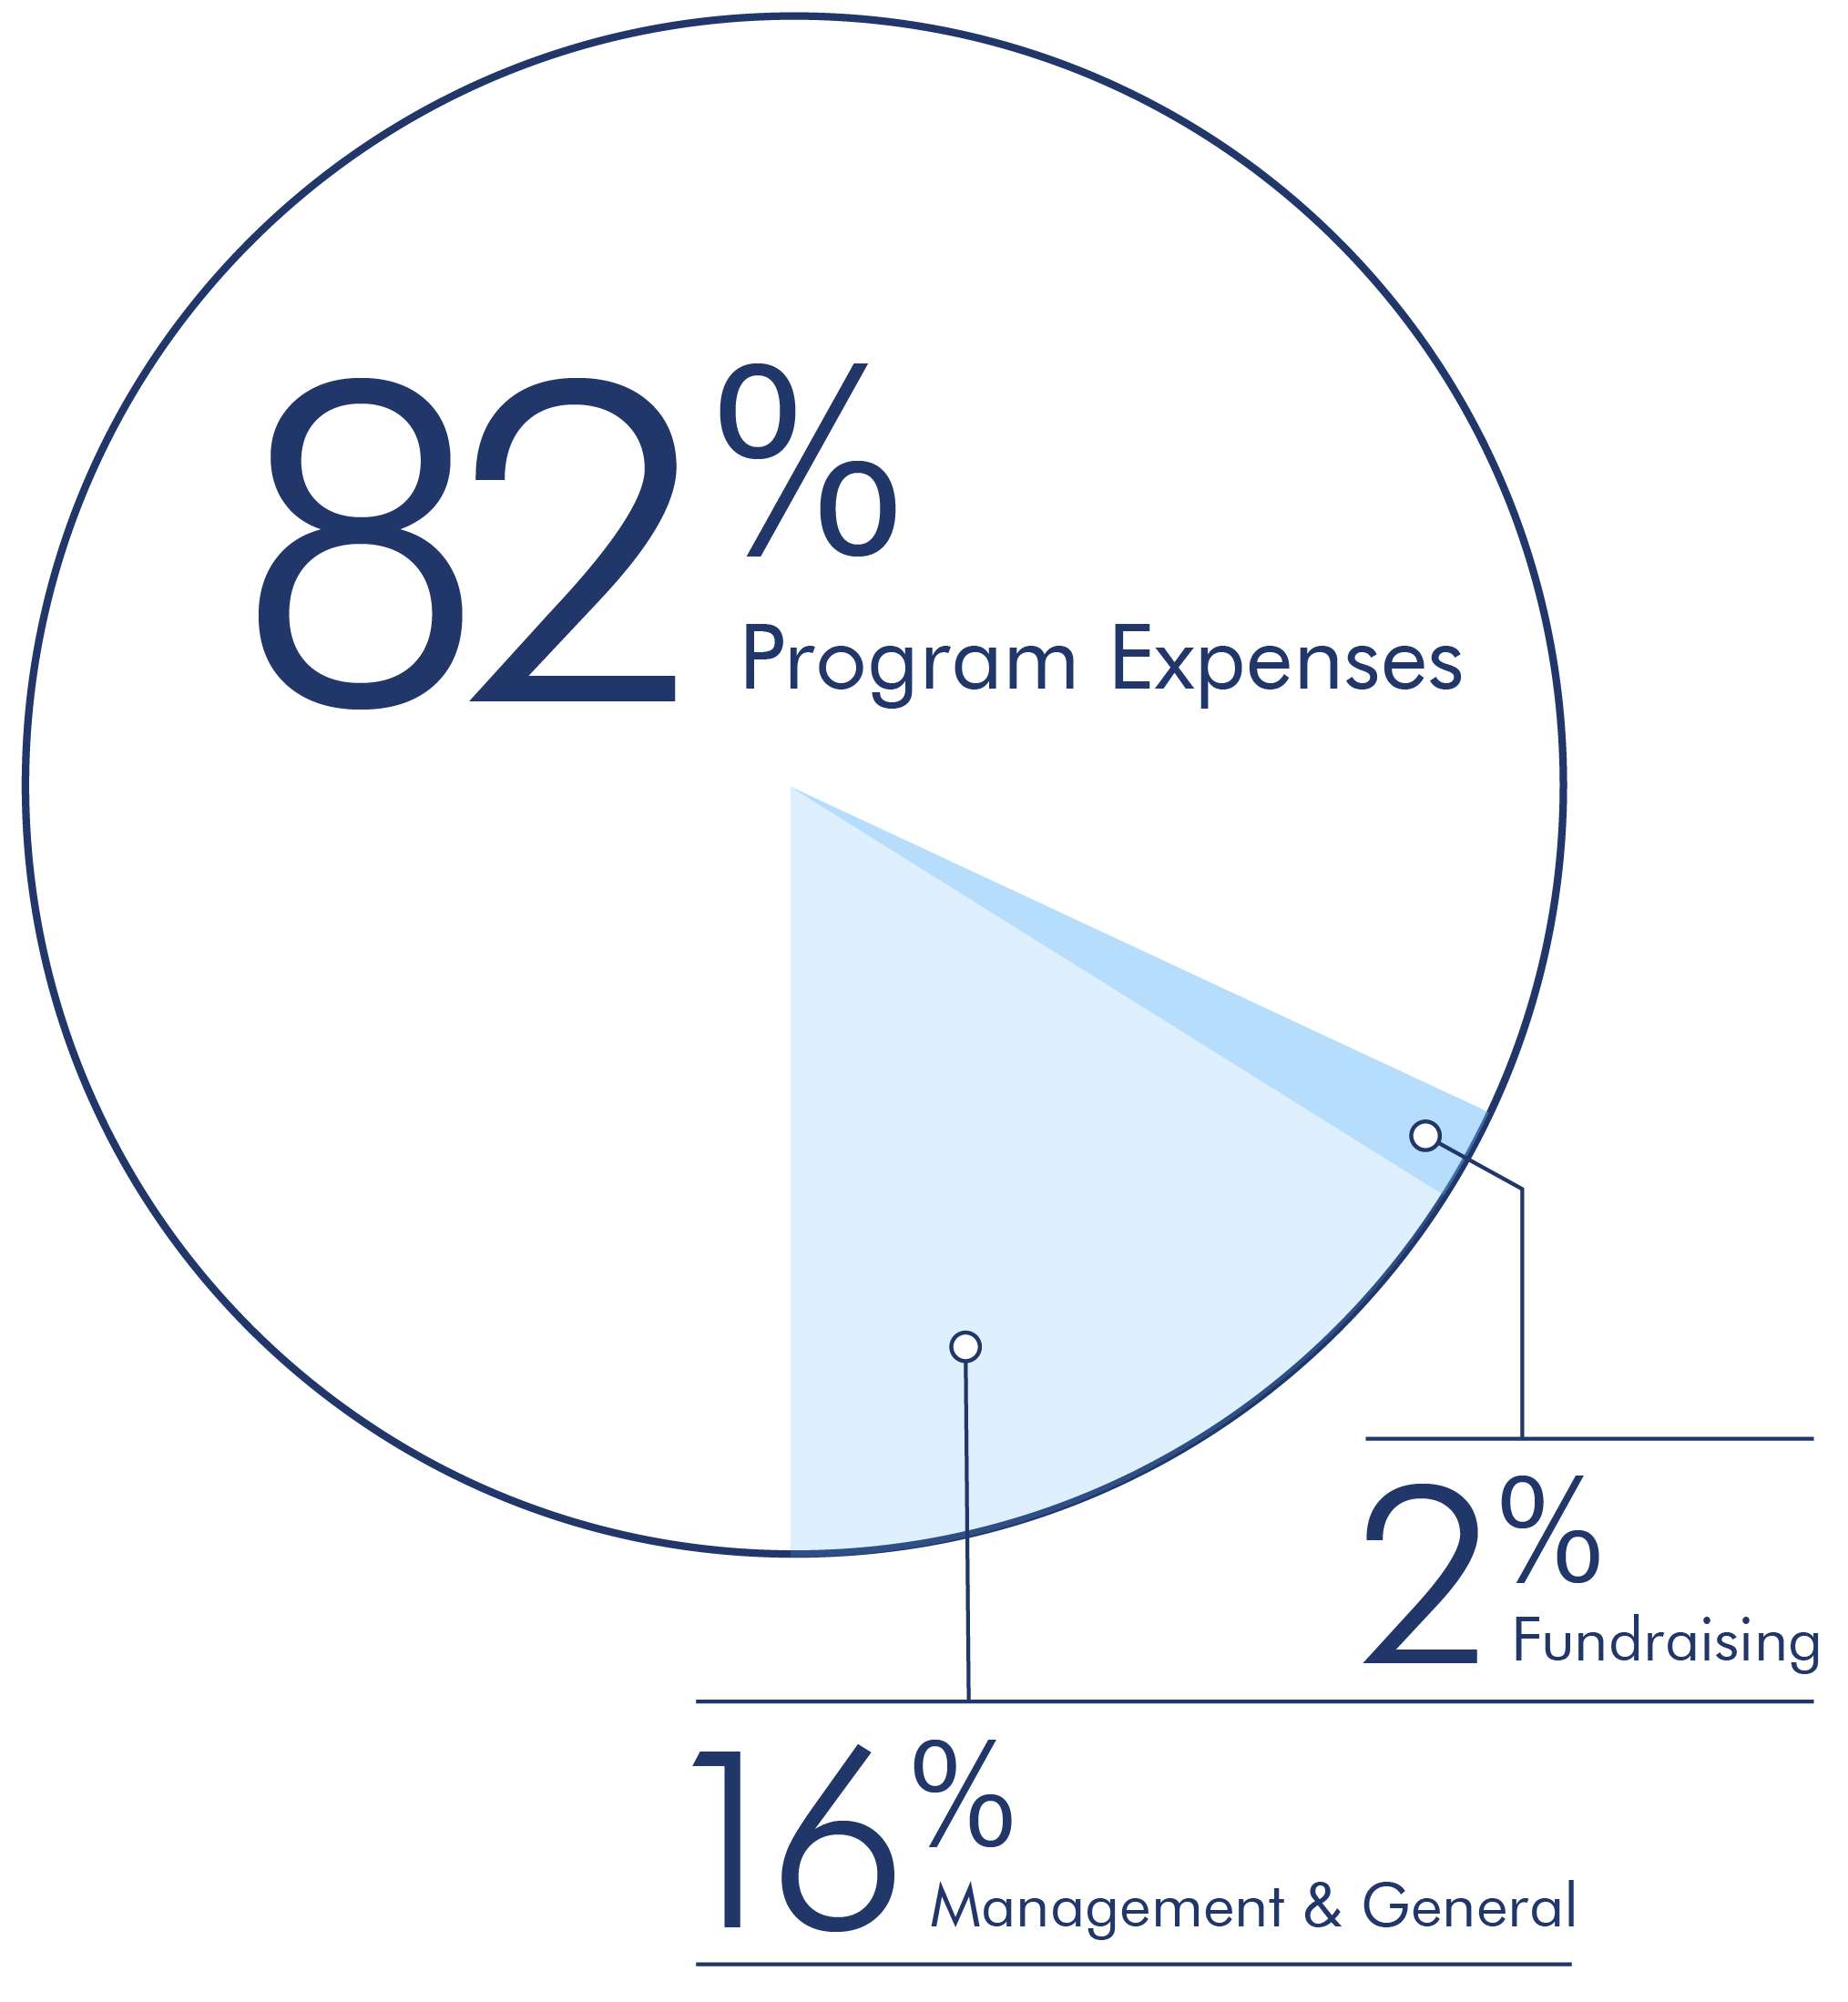 82% program expenses, 16% management and general, 2% fundraising